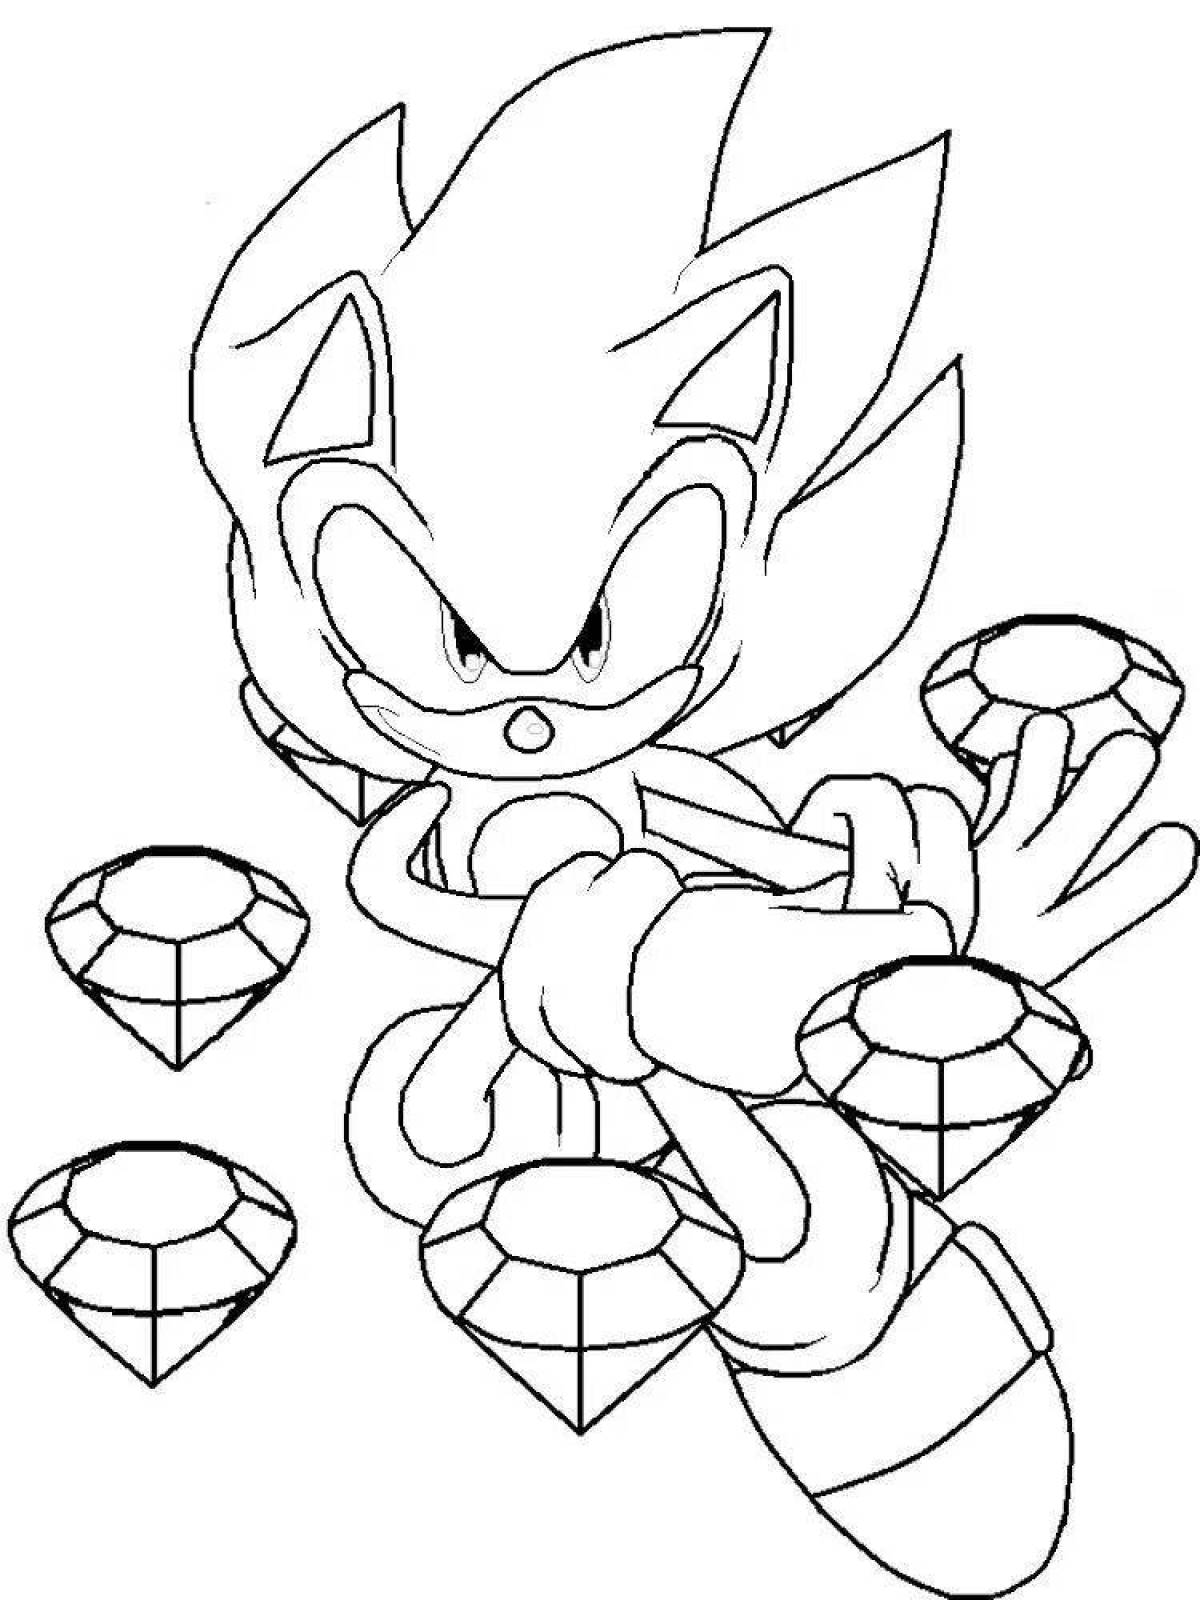 Fascinating sonic game coloring book